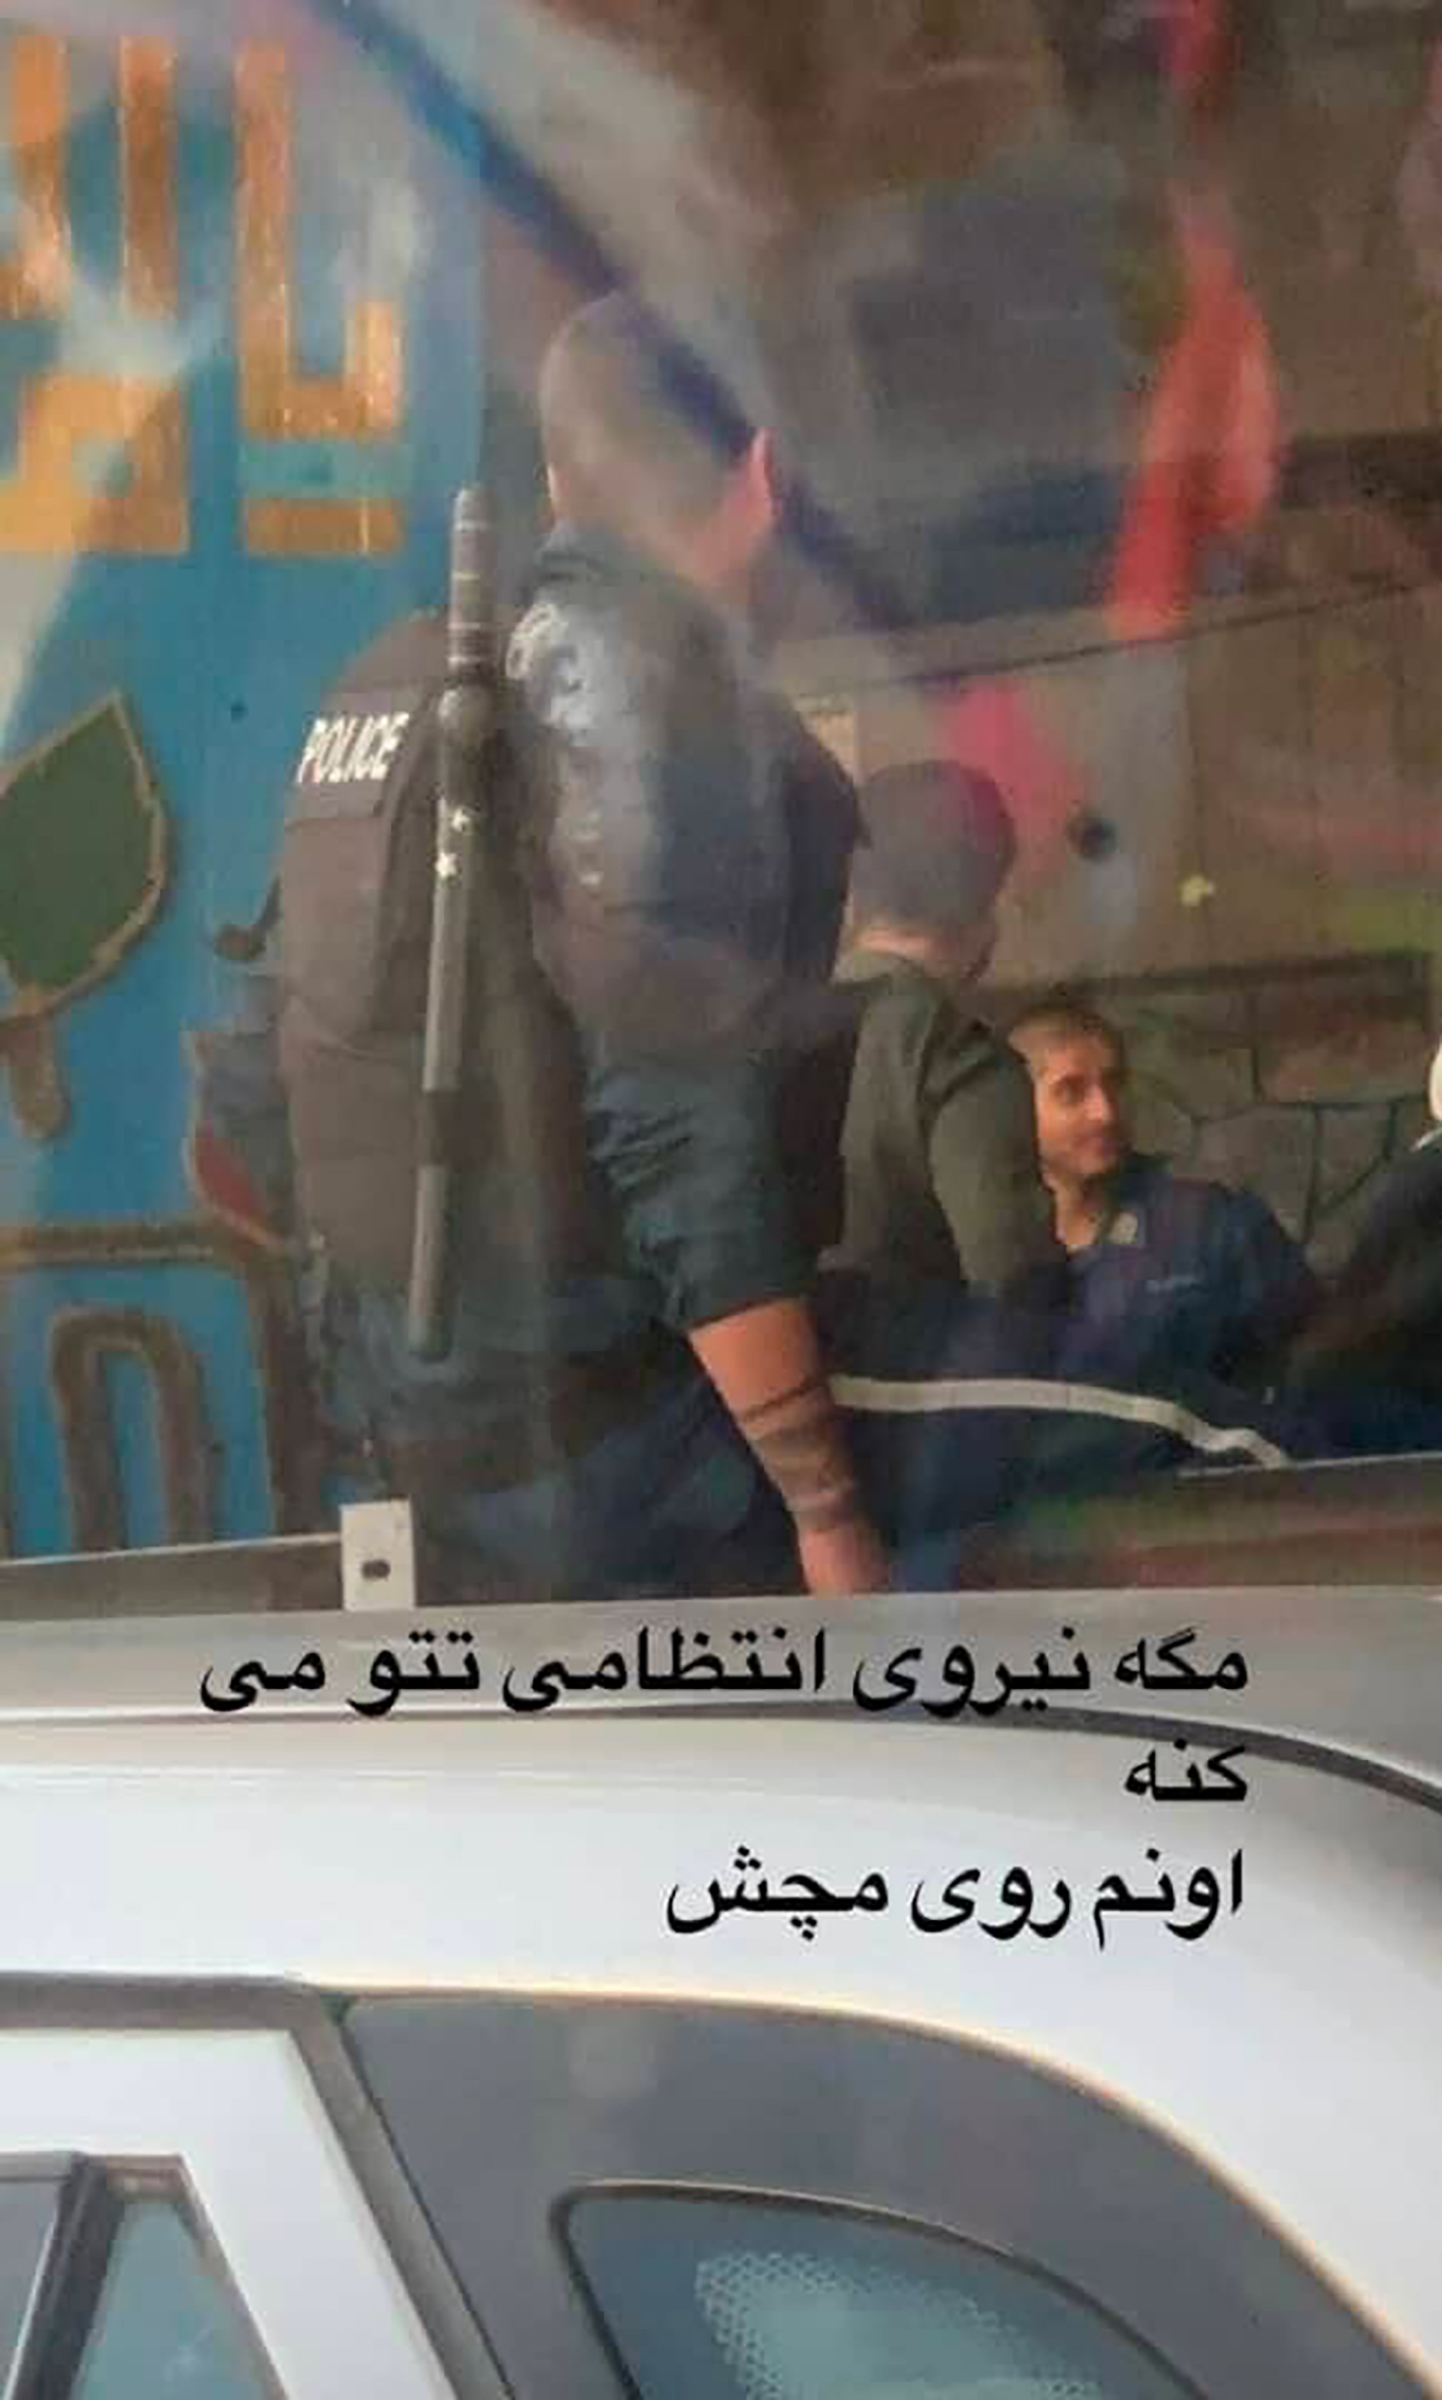 Text says, in Persian, “Does the police force use tattoos? Of all places on their wrist?”